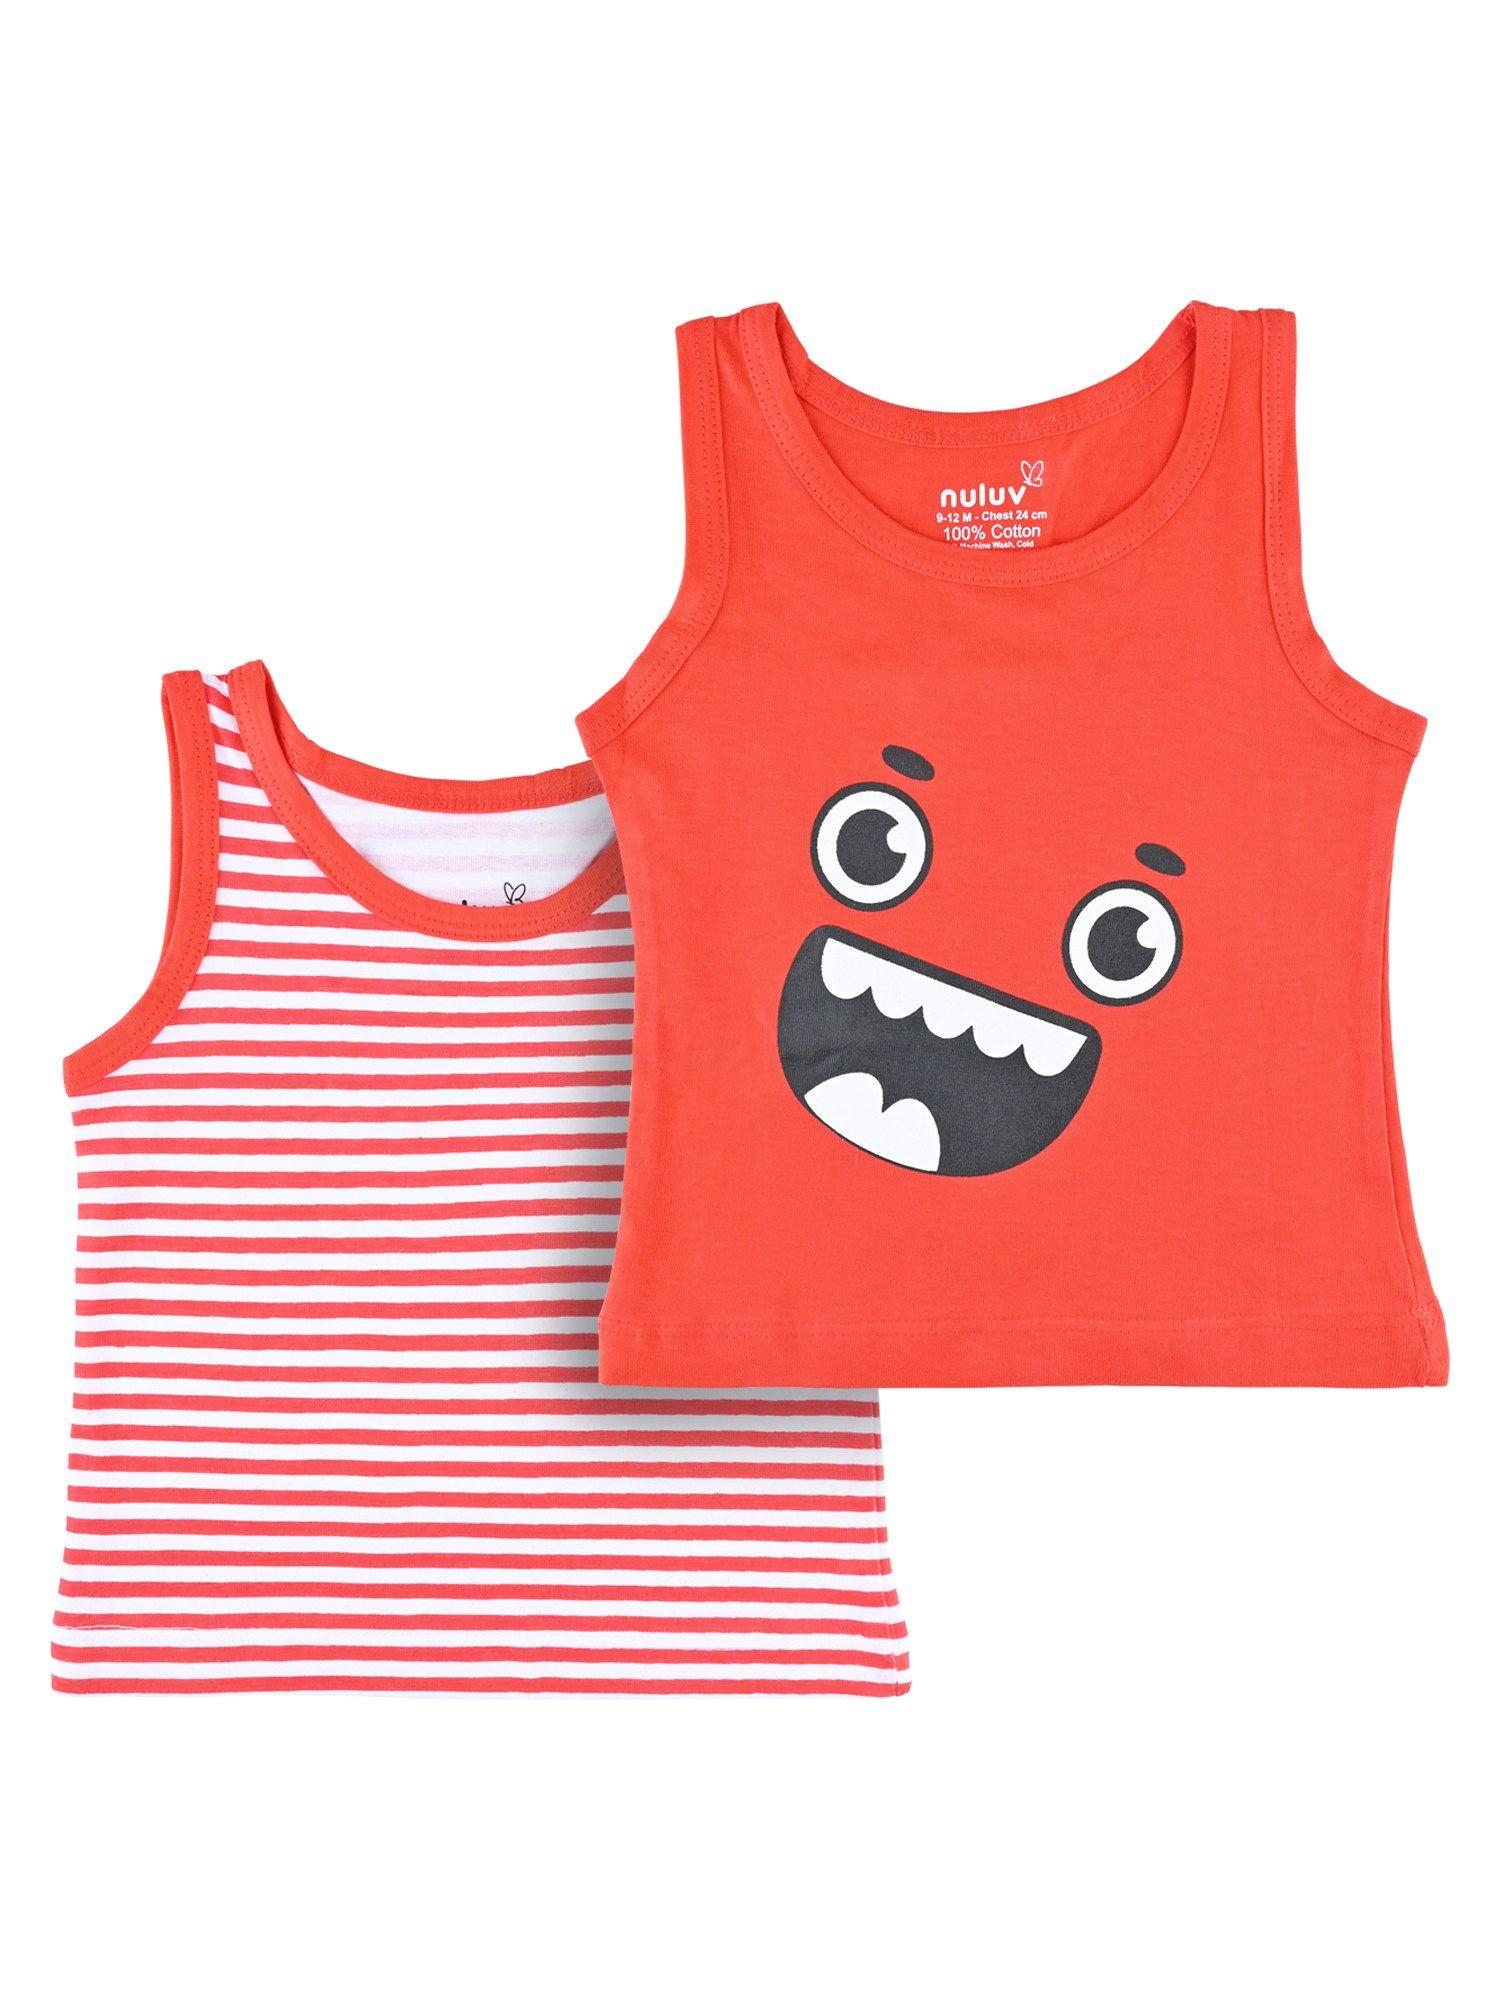 Boys Cotton Printed Red Vest (Pack of 2)